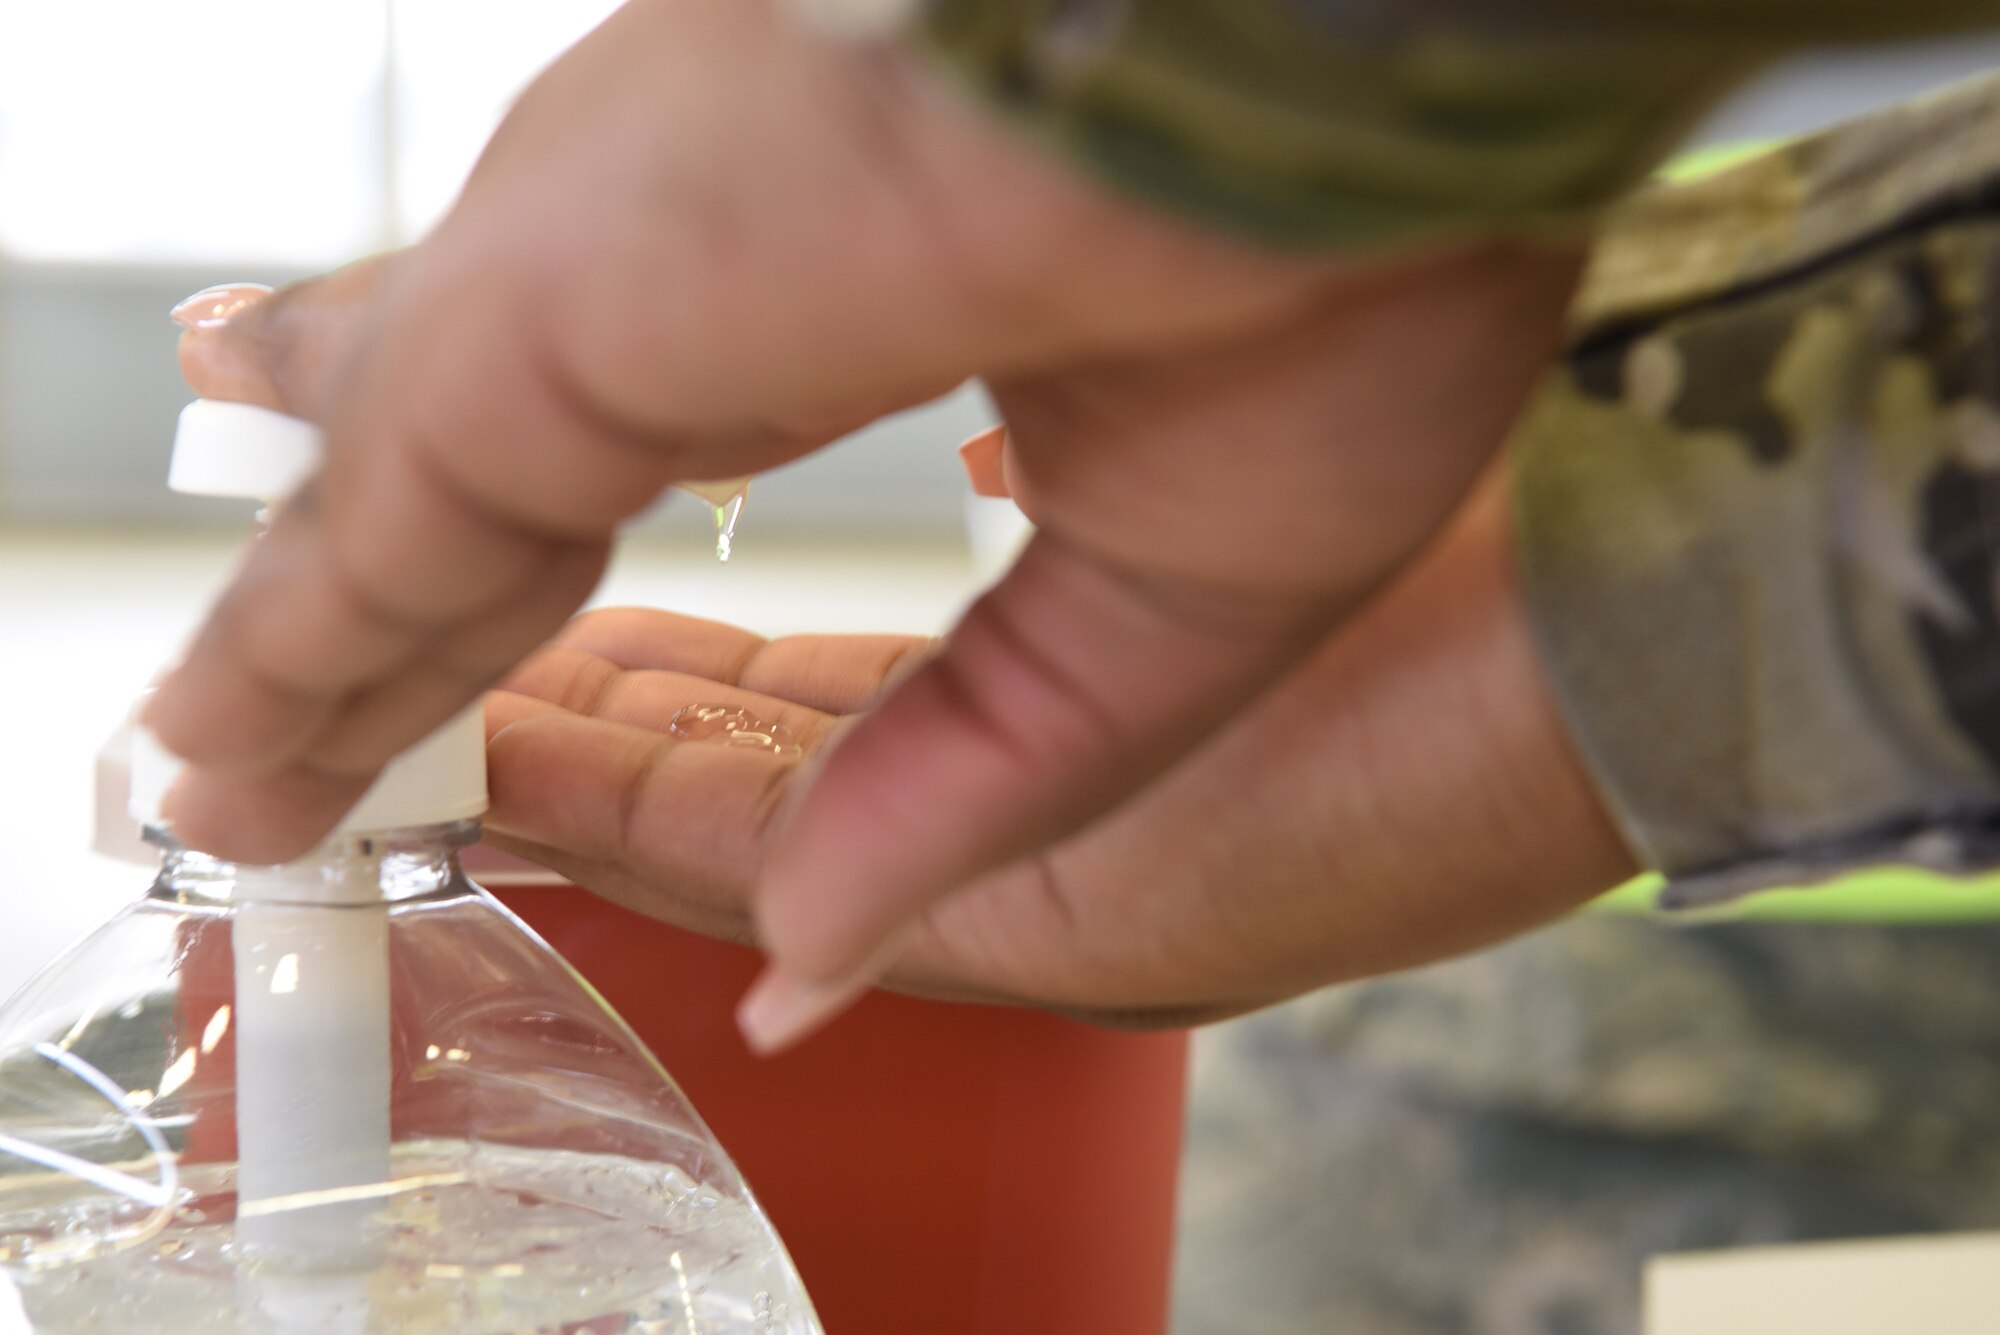 An Airman with the 86th Medical Group uses hand sanitizer prior to administering the flu vaccine to Airmen at Ramstein Air Base, Germany, Oct. 27, 2020.